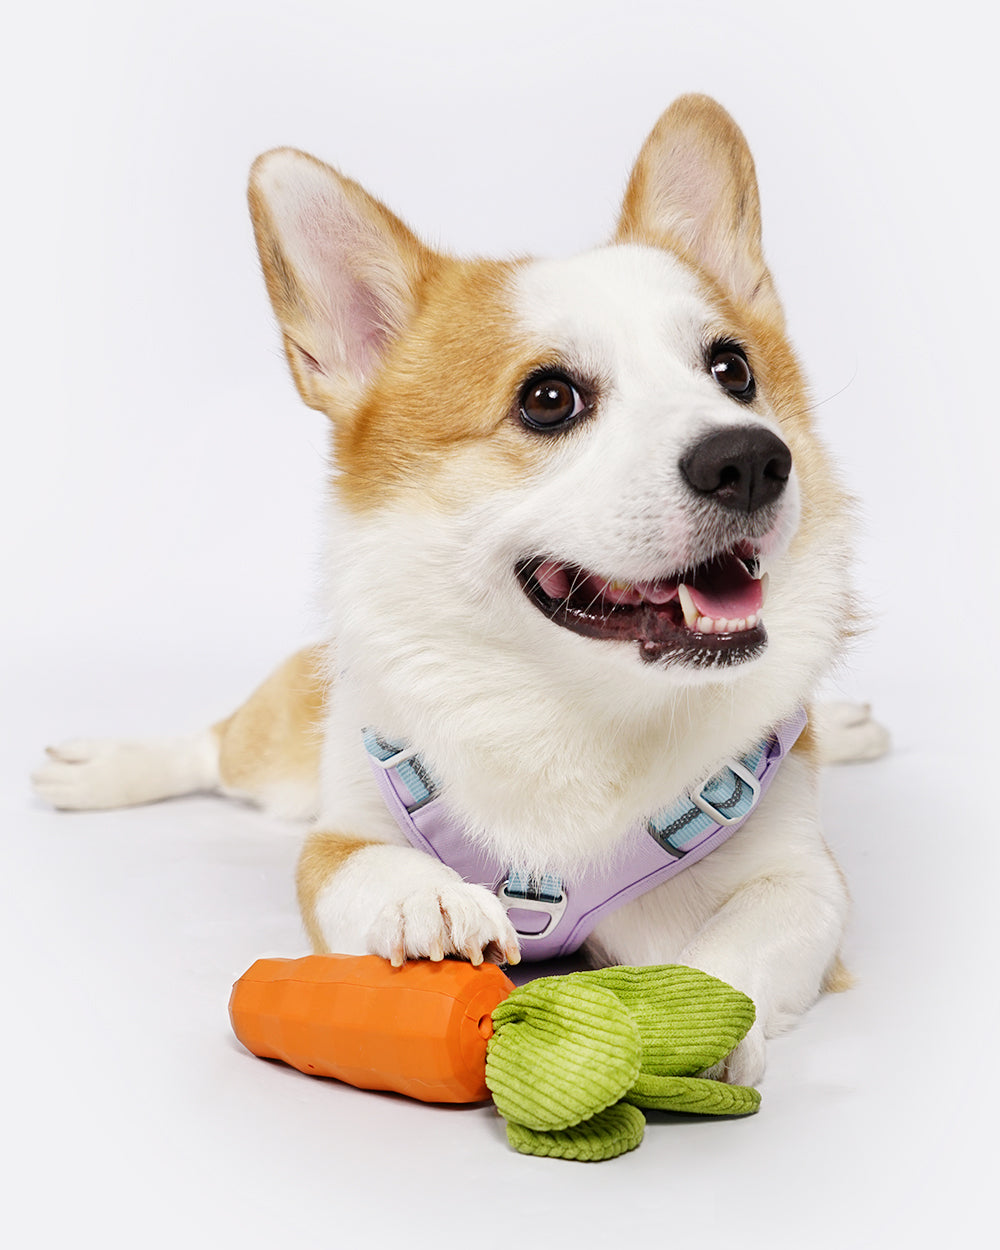 Squeaky Rubber Chew Dog Toy - Orange Carrot